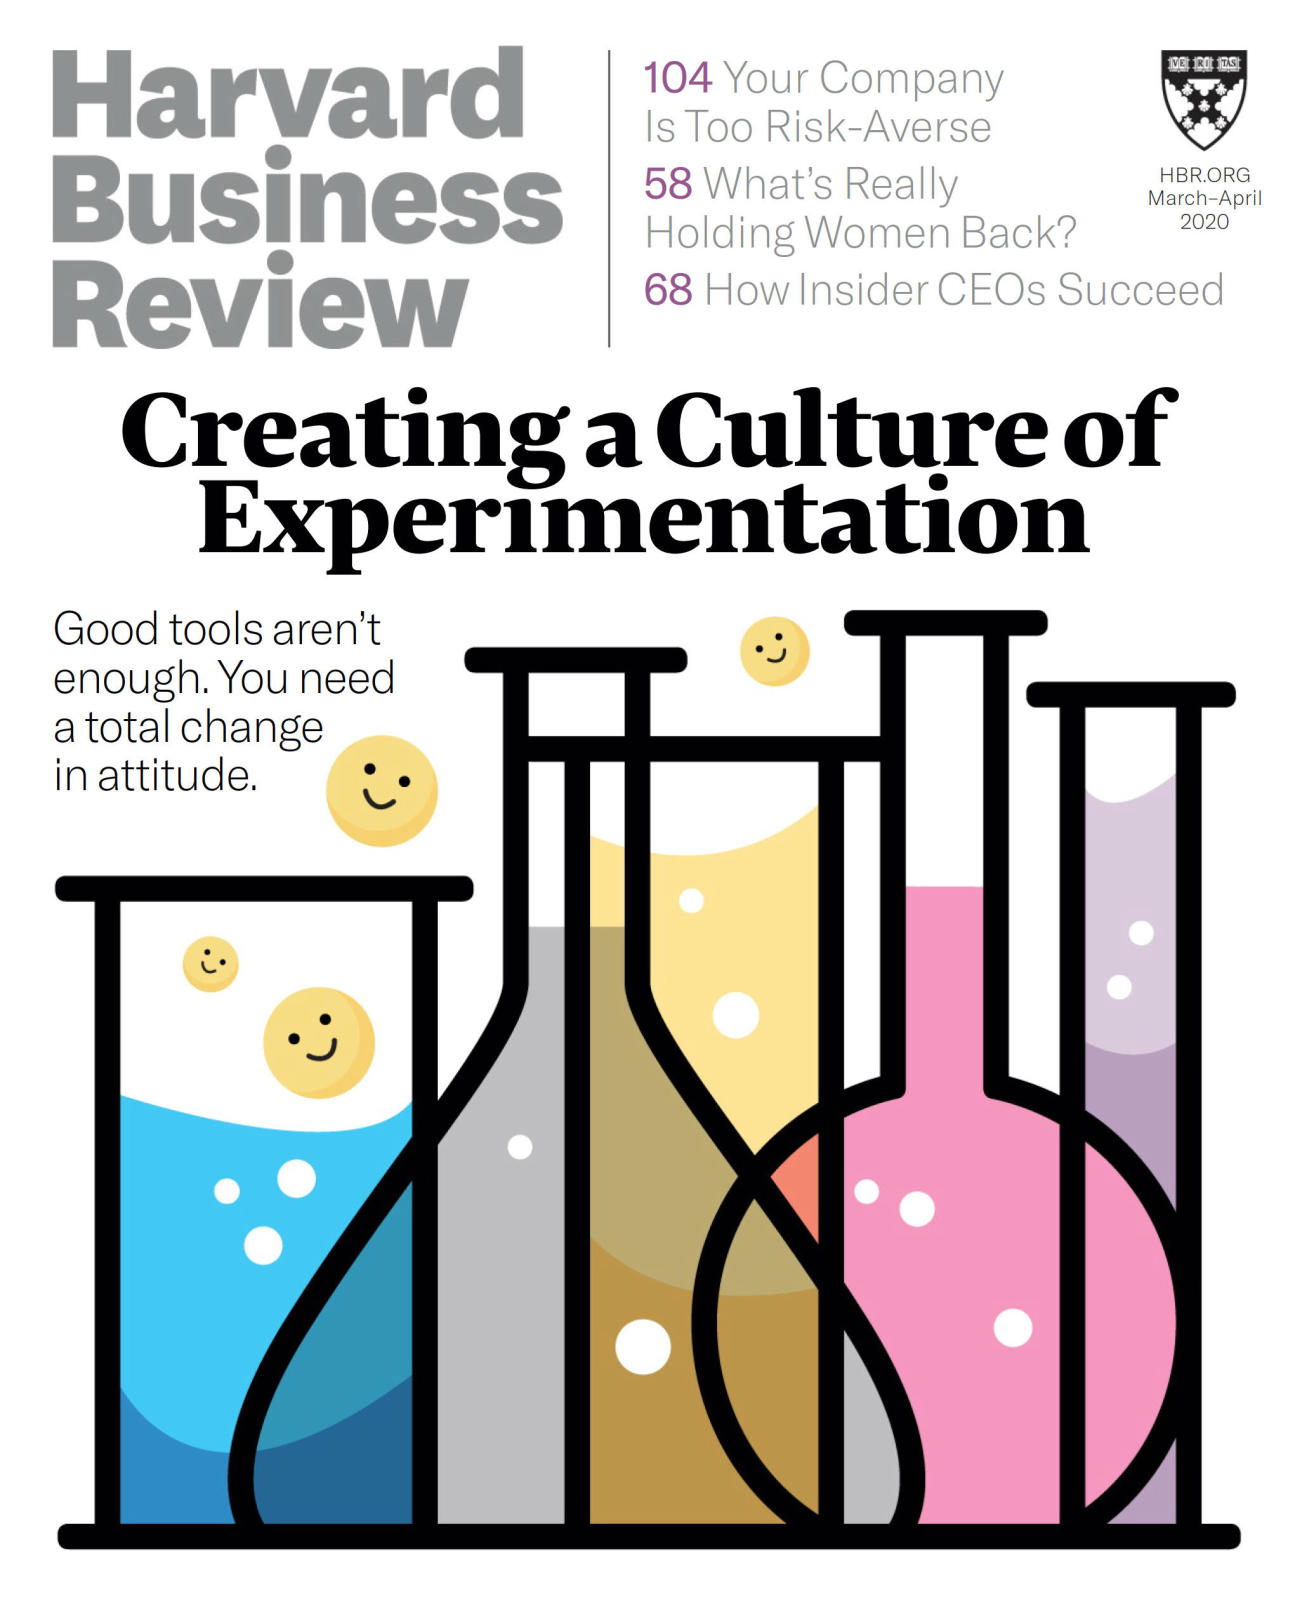 Harvard Business Review 哈佛商业评论 MARCH&APRIL 2020年3月&4月刊